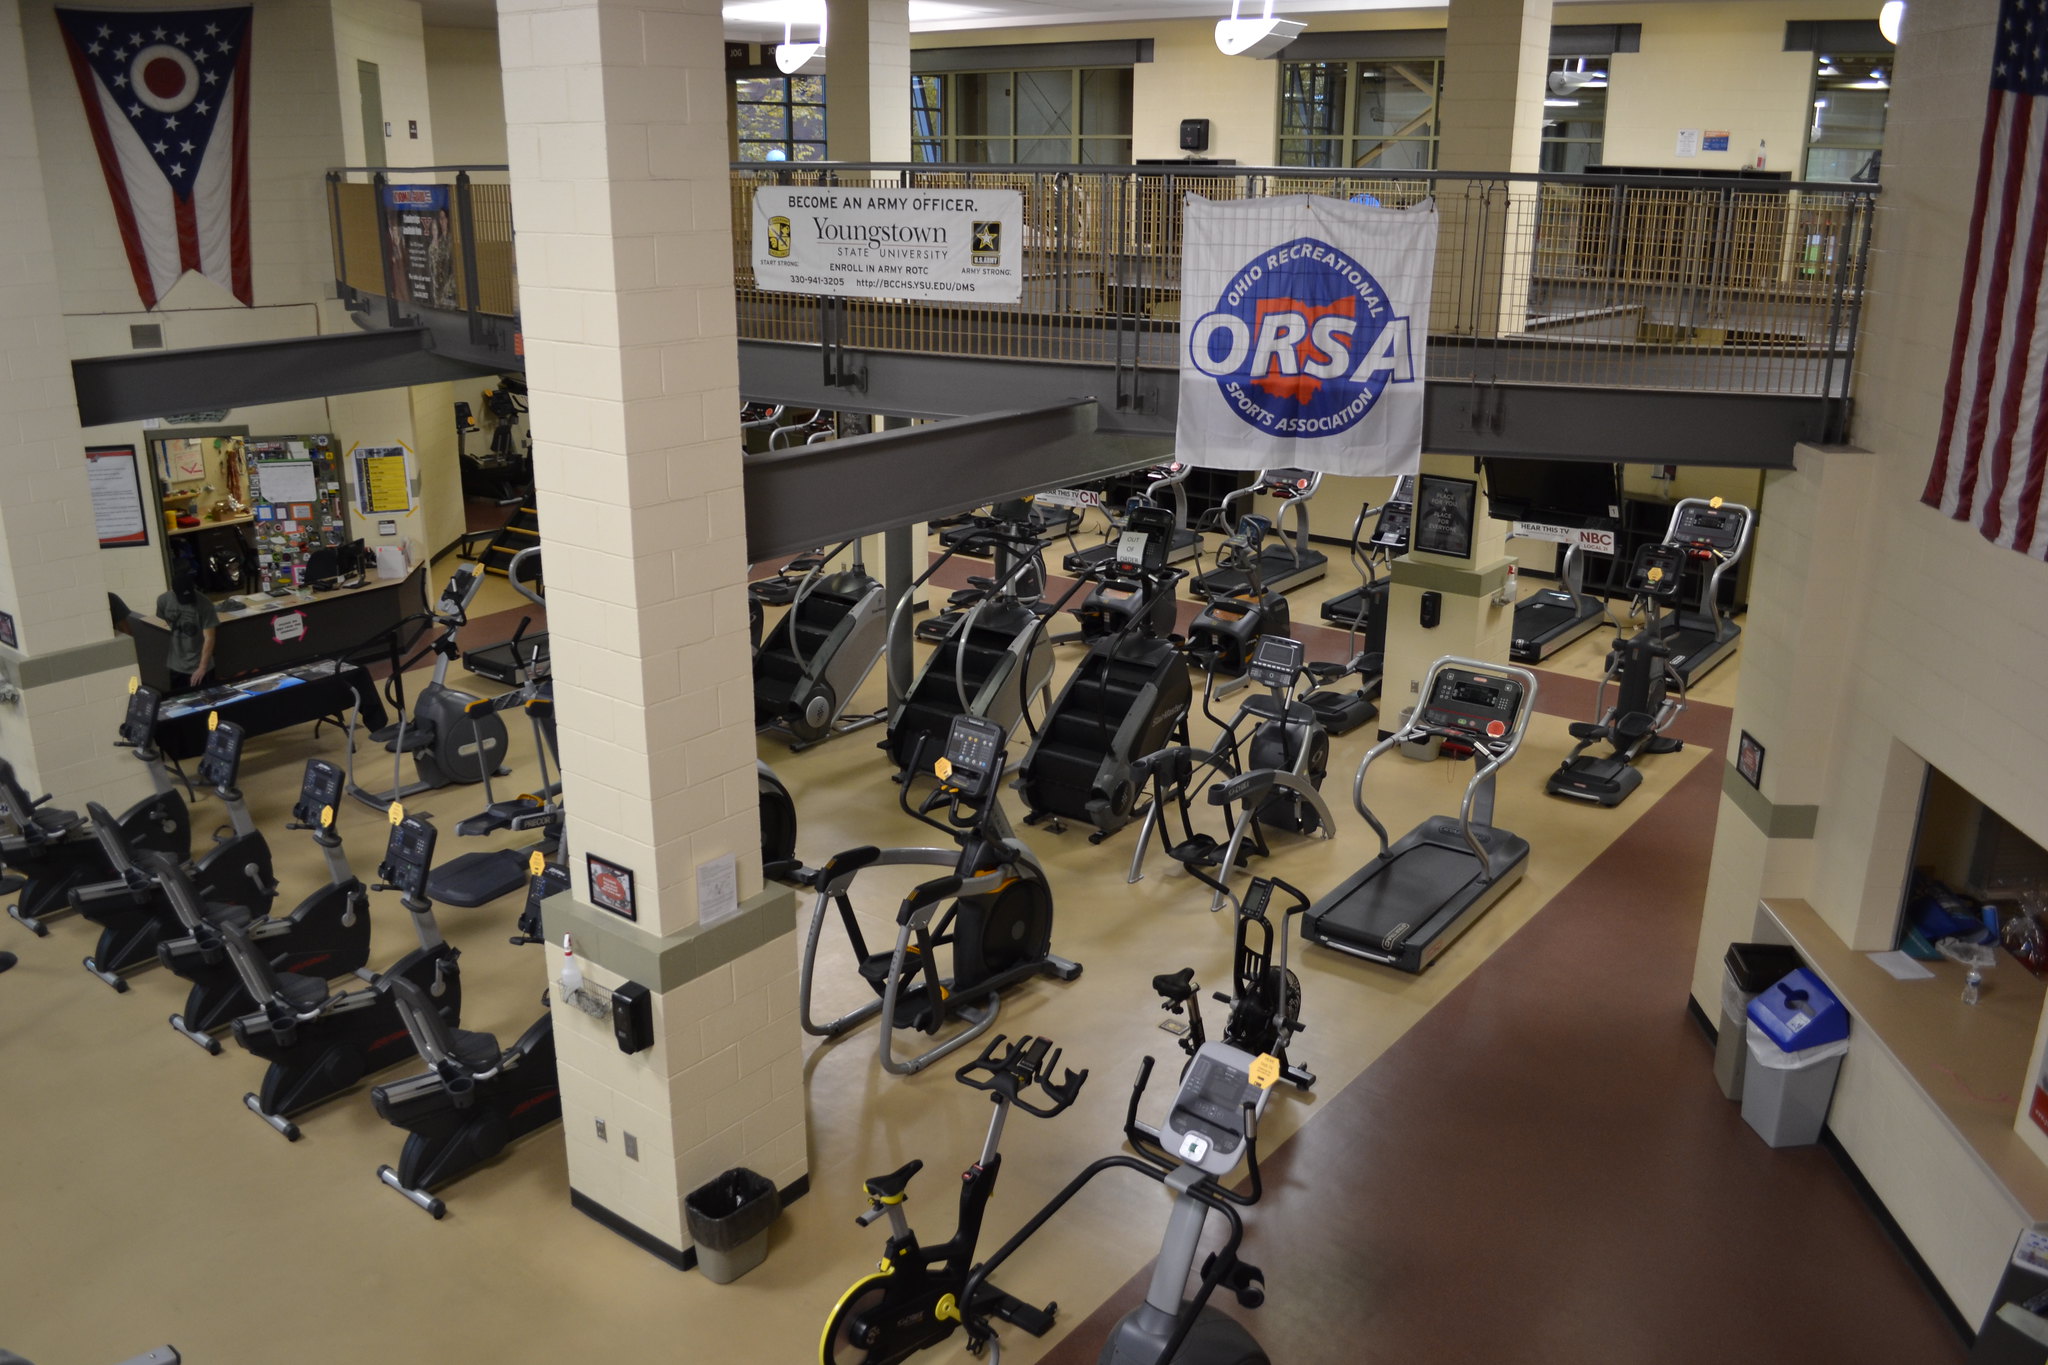 Cardio Equipment Available in the Rec Center